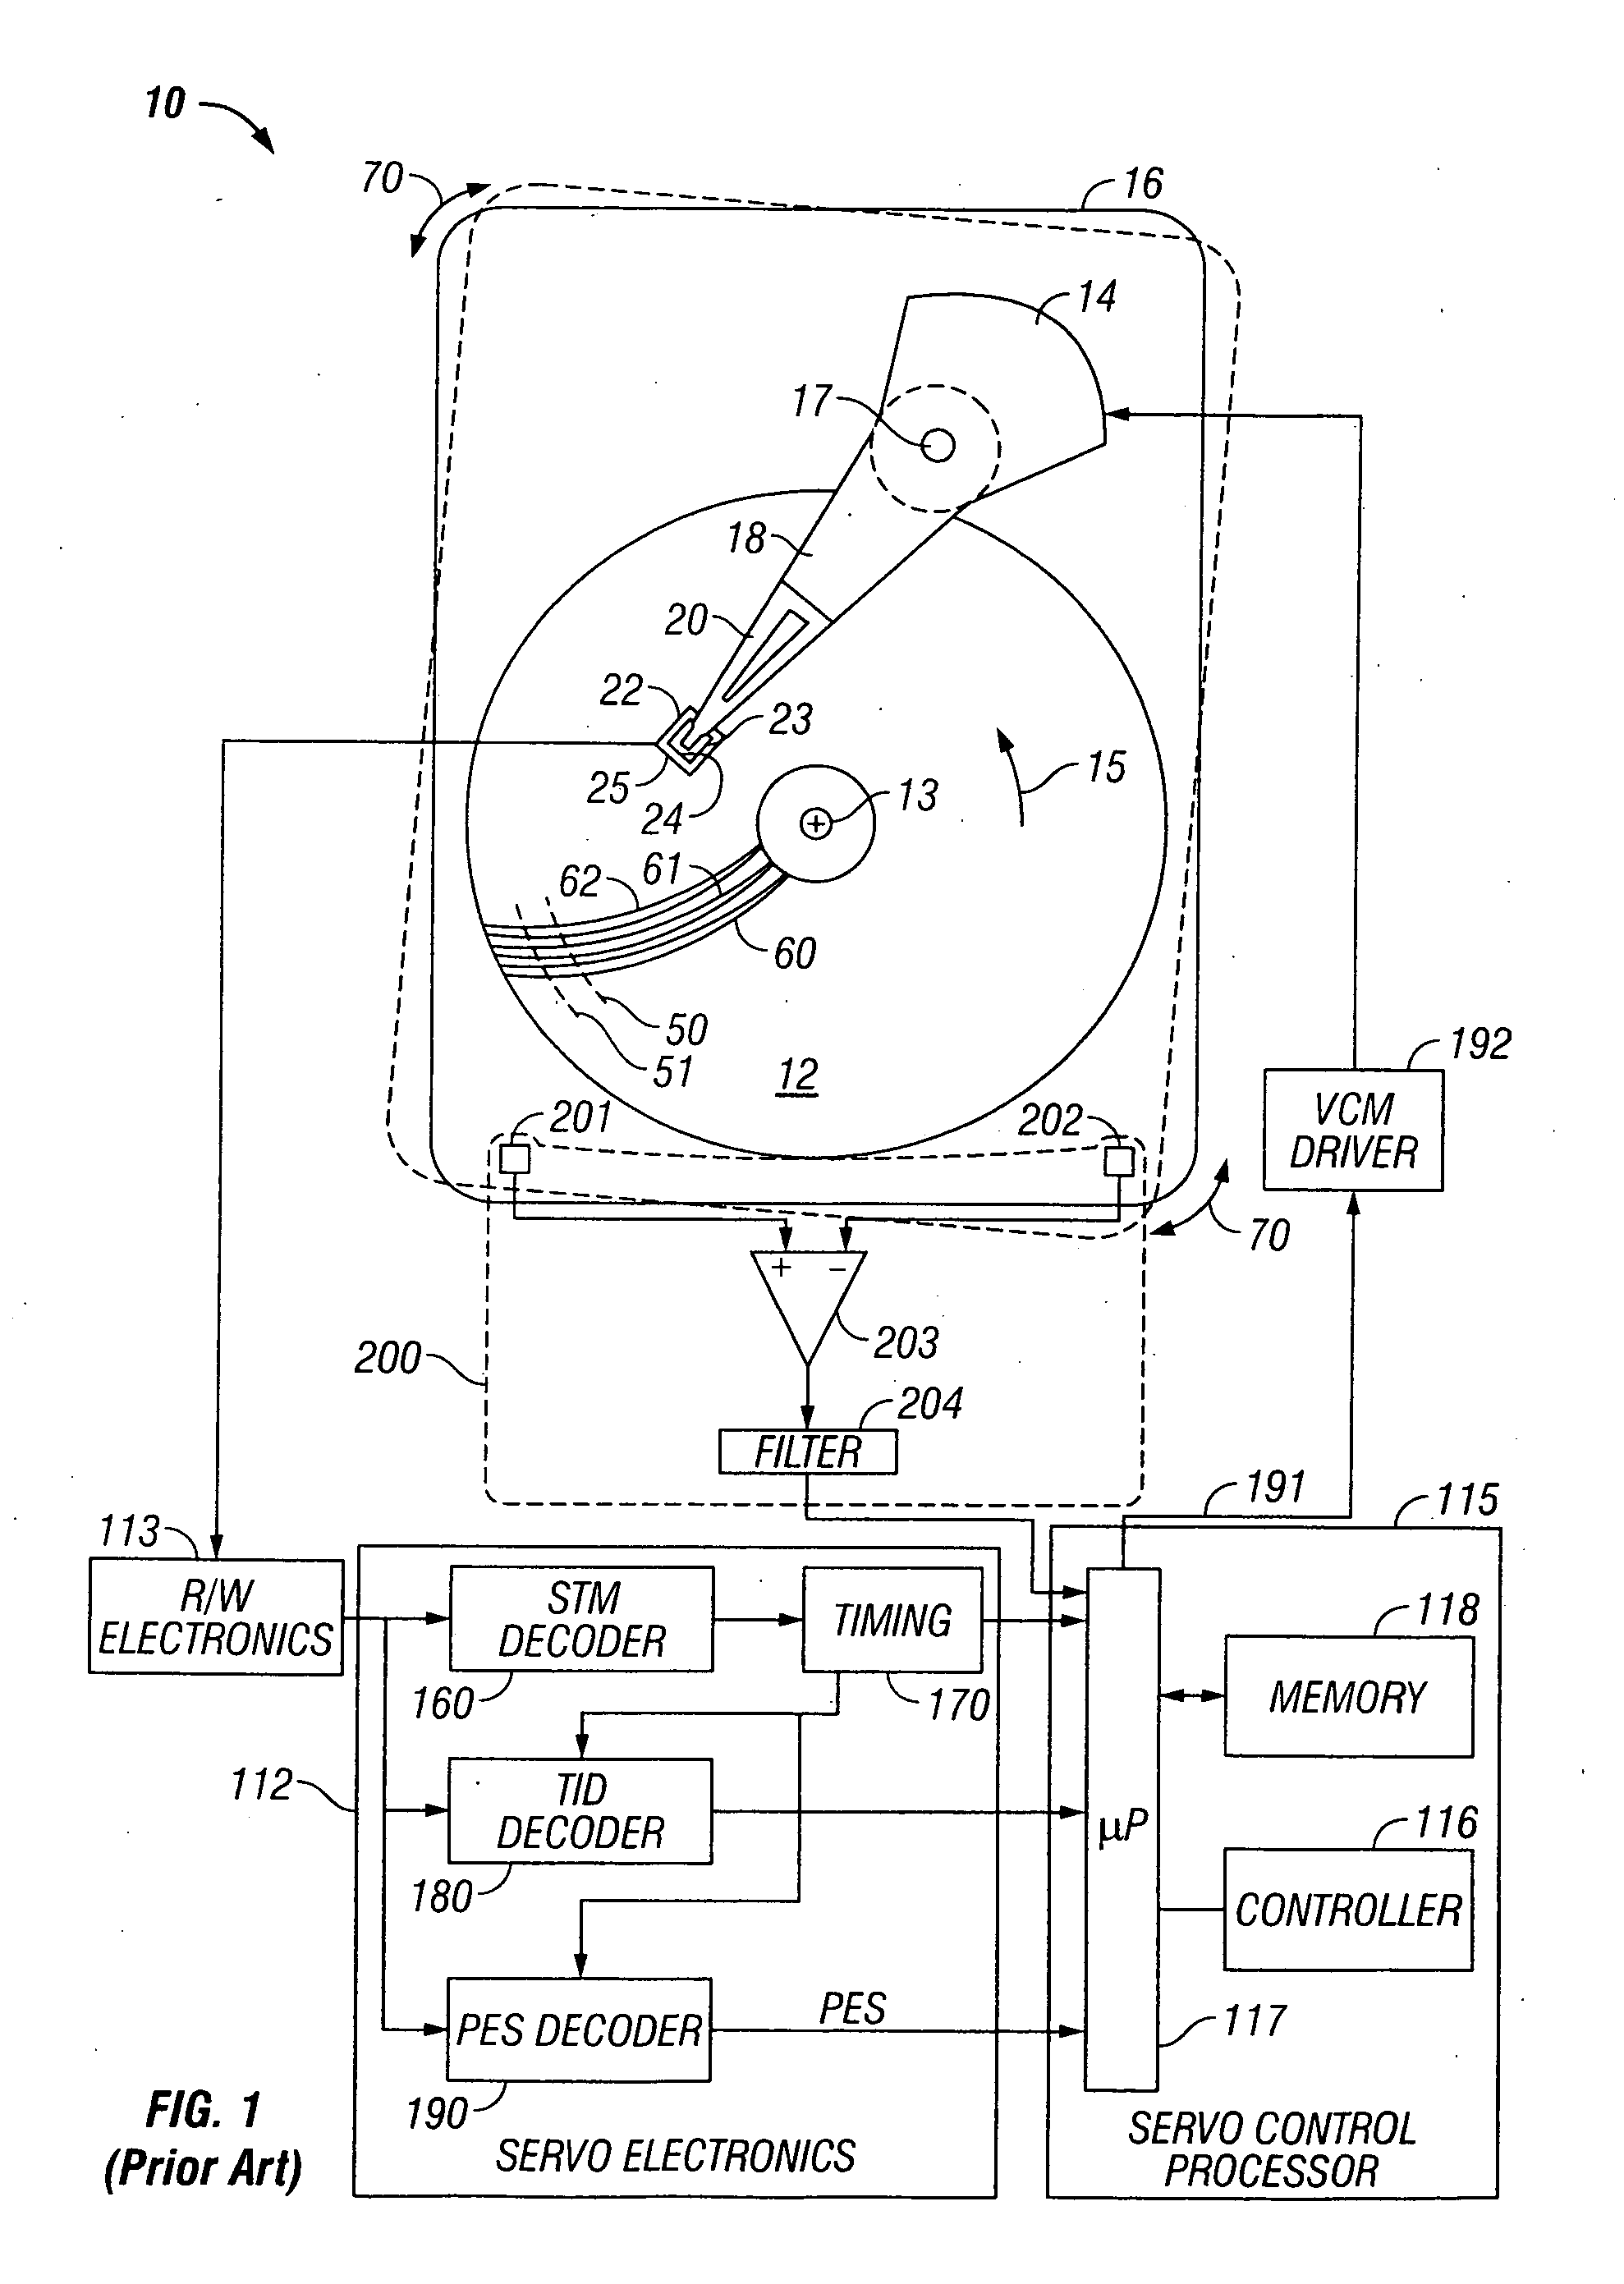 Disk drive using a disturbance sensor for disturbance frequency-identification and suppression